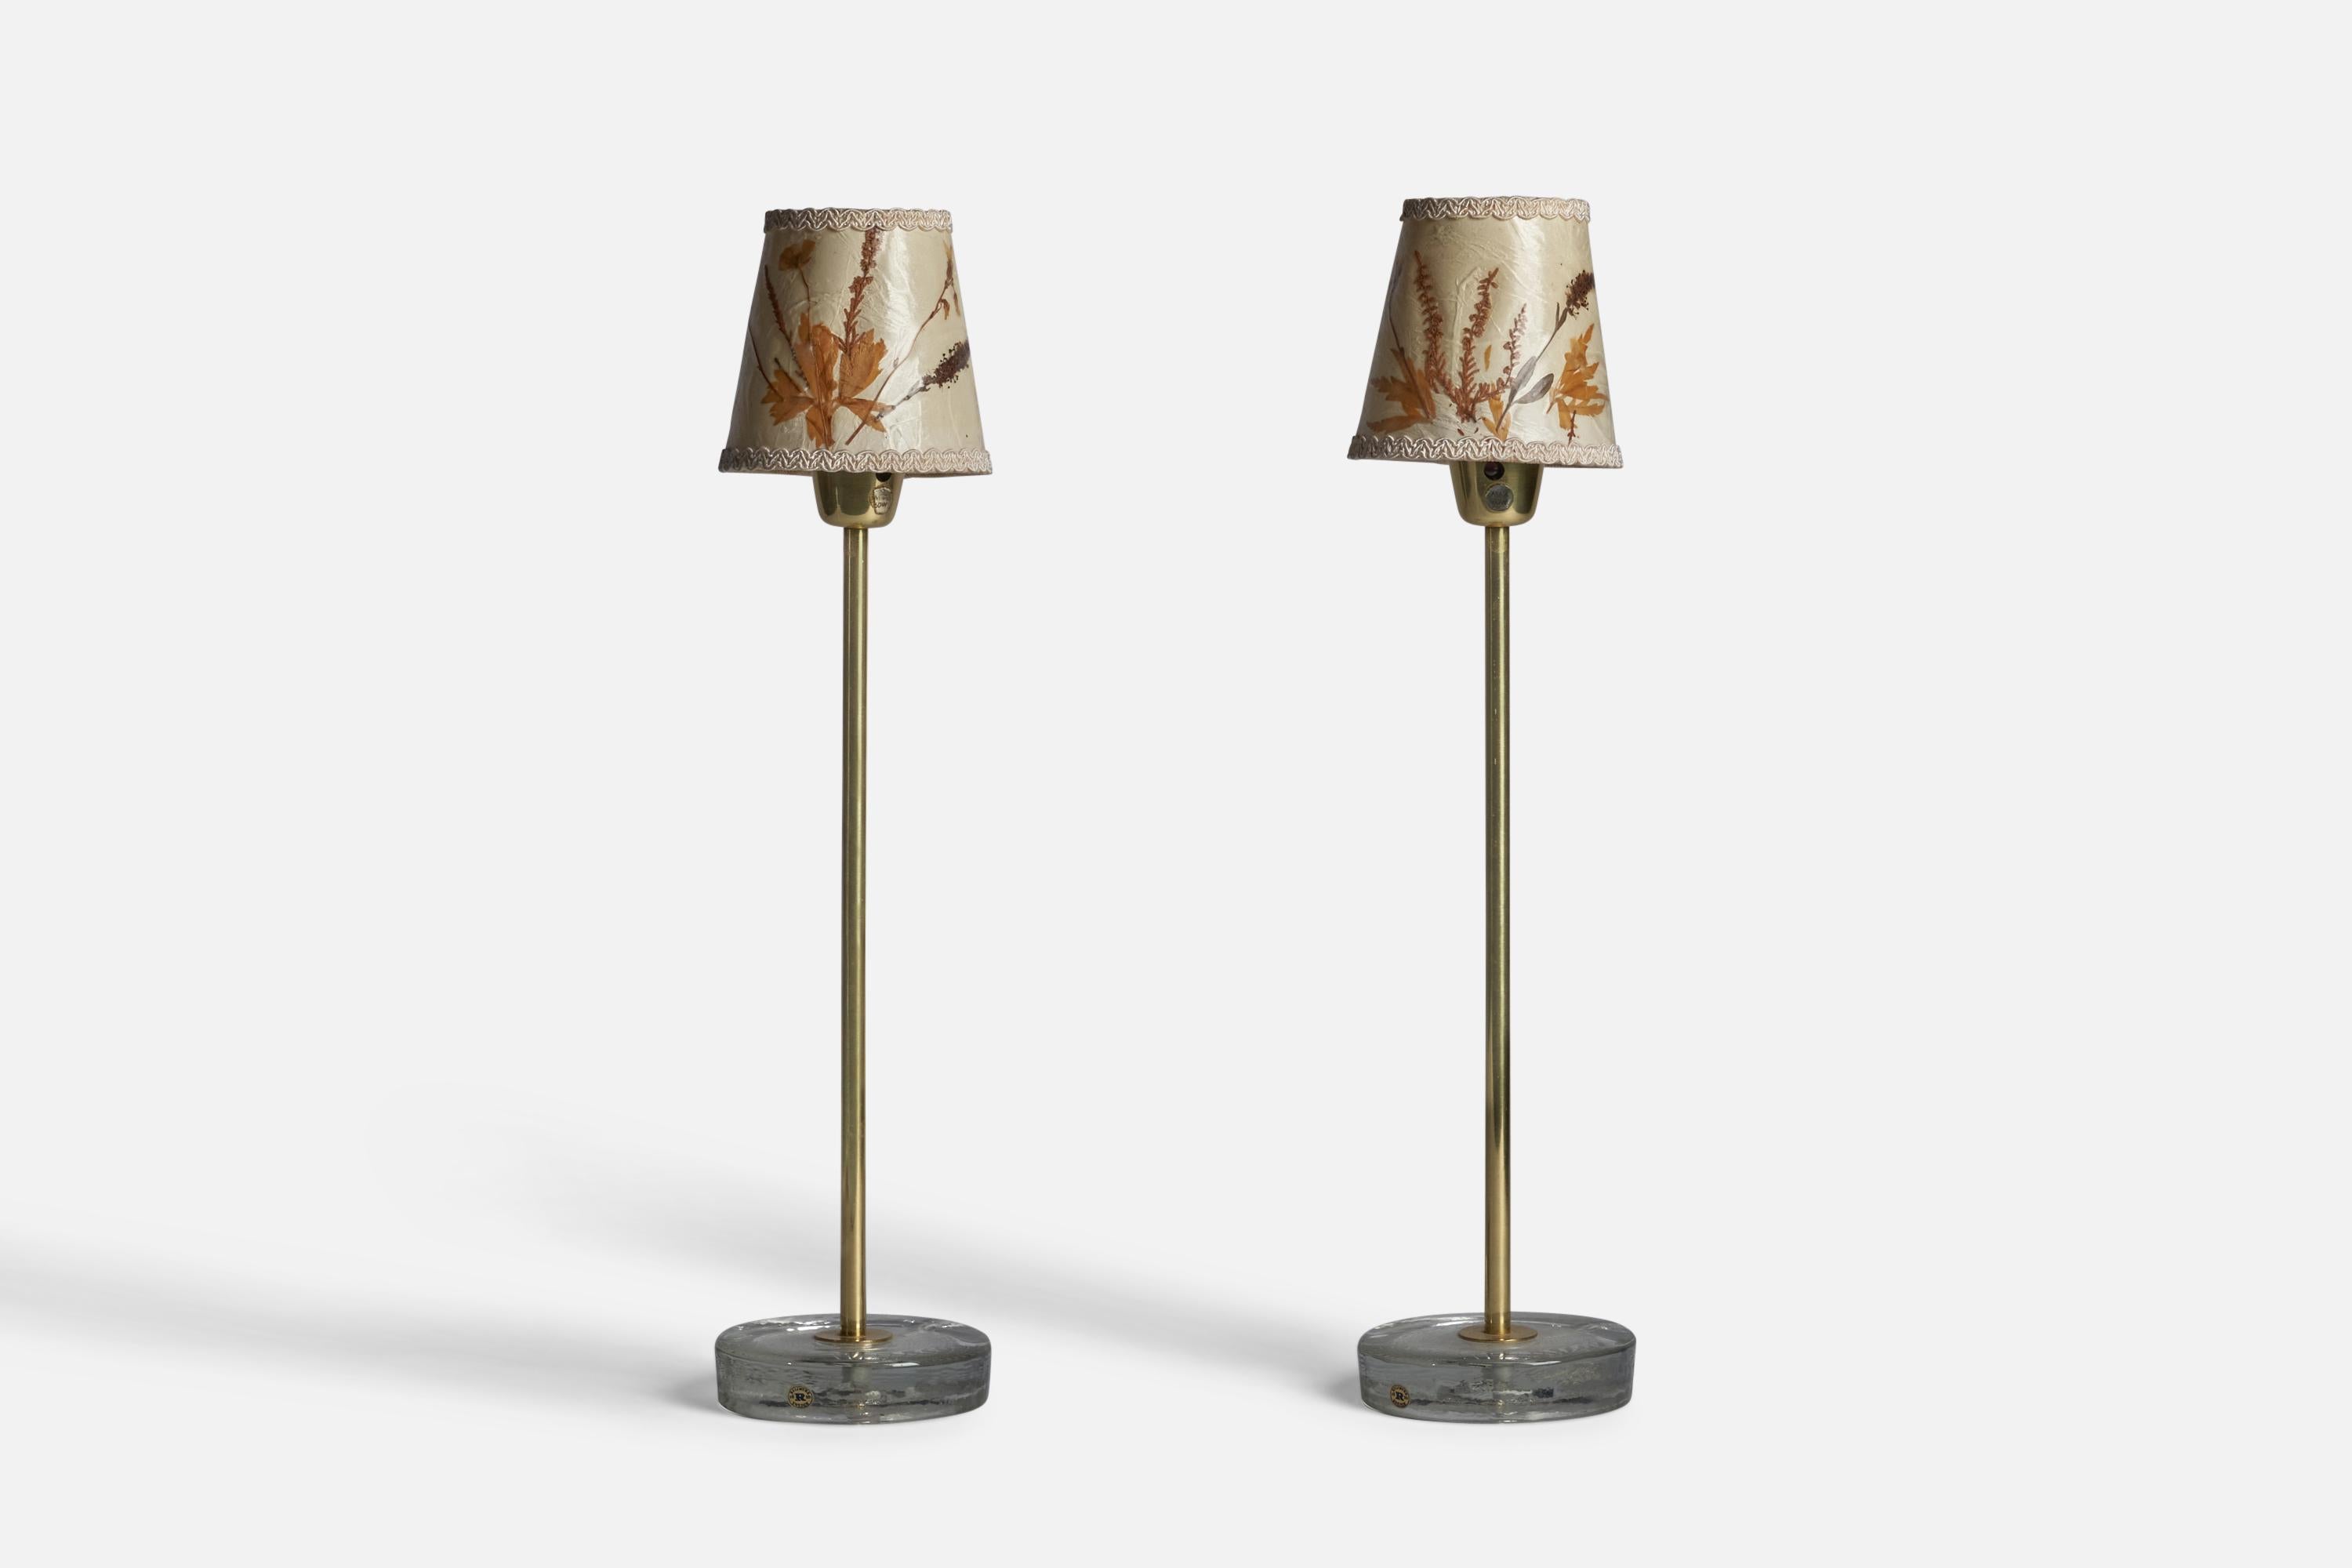 A pair of brass, glass and paper with laminated plants table lamps, designed and produced in Sweden, 1950s.

Overall Dimensions (inches): 21.5